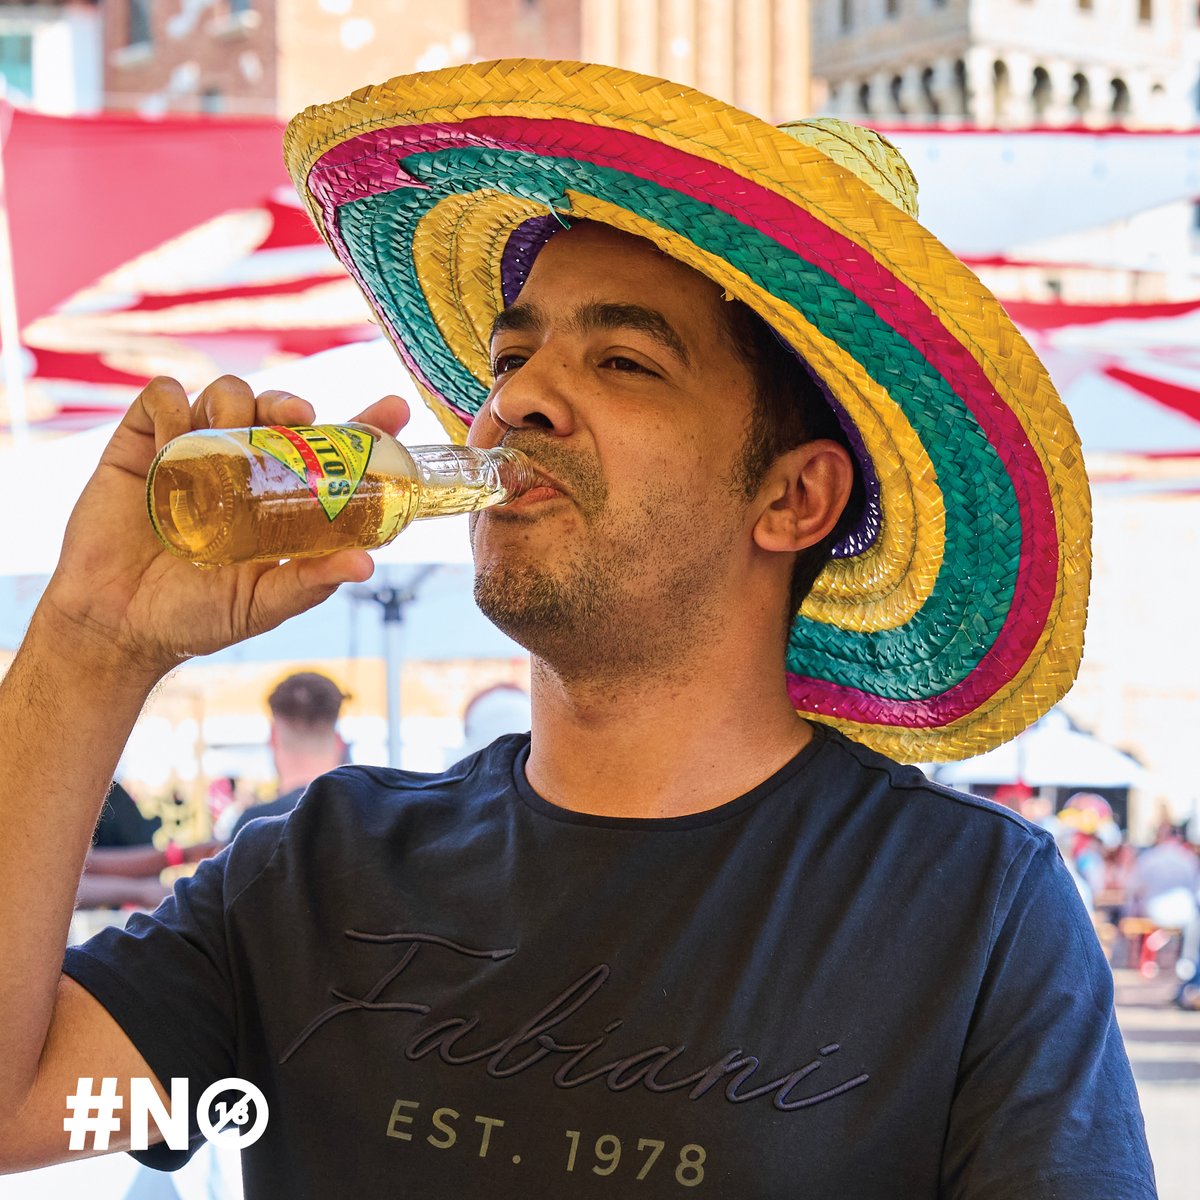 Hola party people! 🥳Brace yourselves ‘cause the Festival De Mexico is on its way to turn up the heat! We’re one month away - save the date, dust off your sombrero, and start your countdown. Shop tickets now: bit.ly/3TUobRF #SalitosBeer #SALITOSRepublic